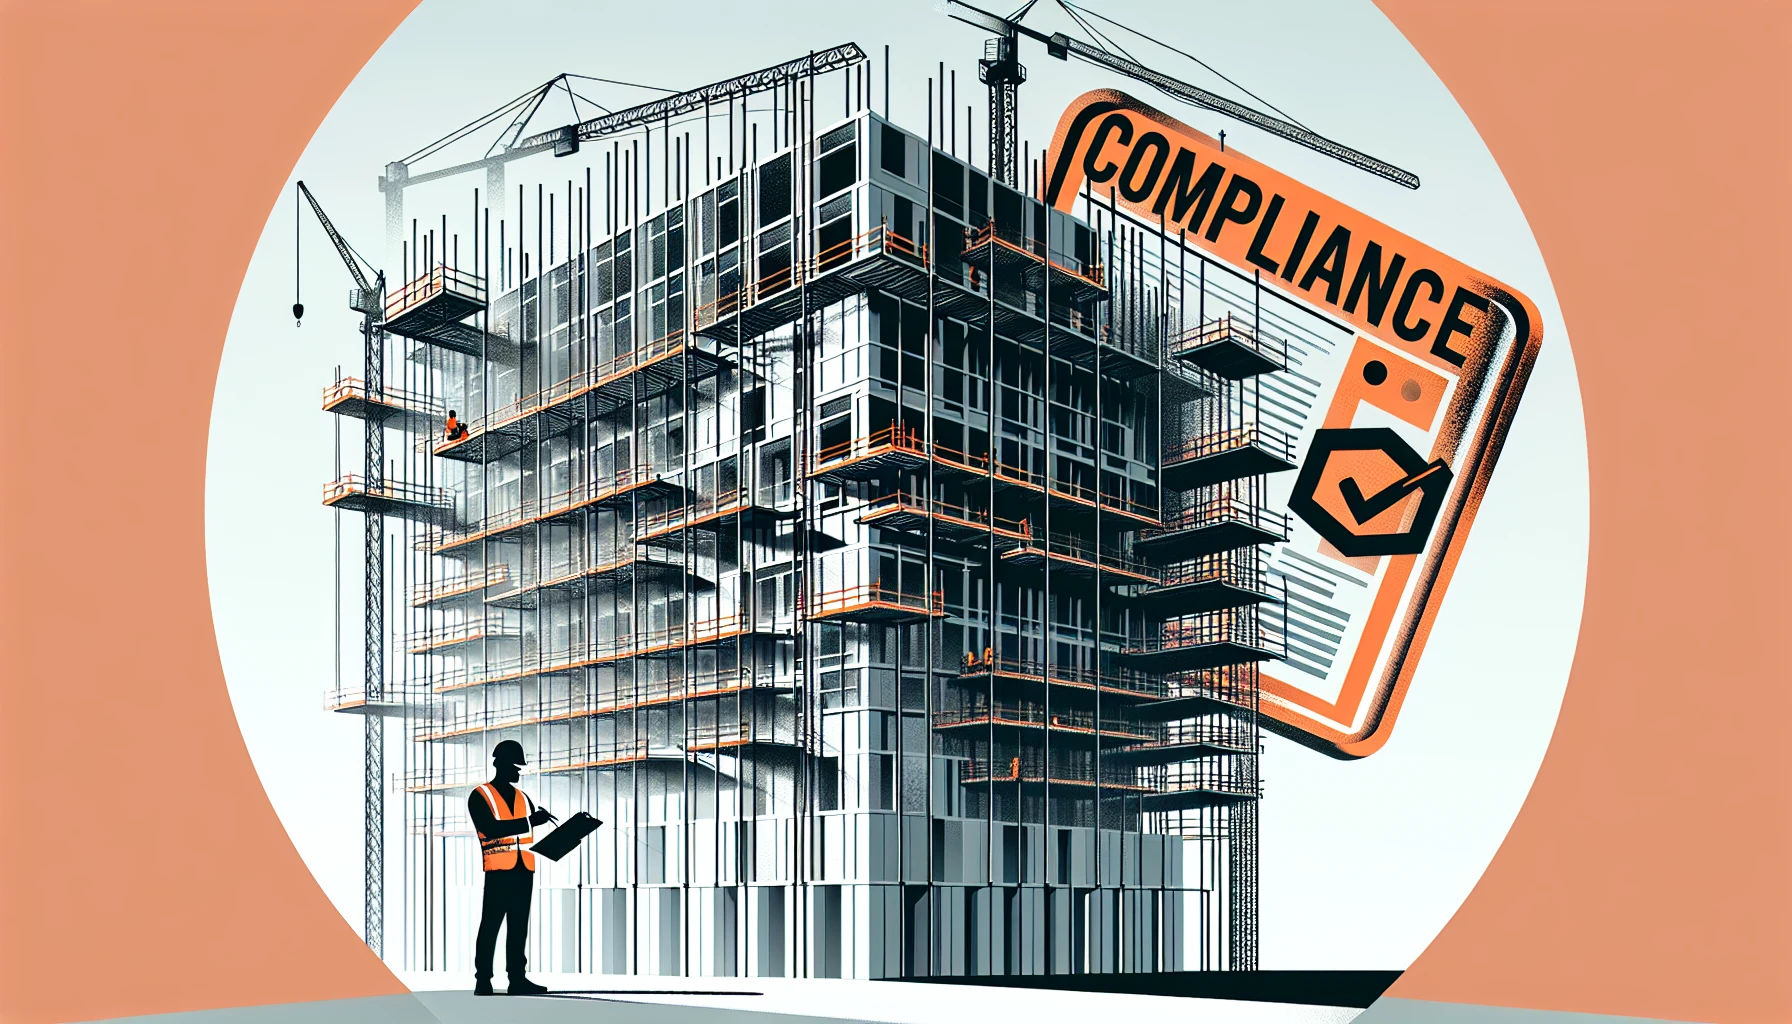 Project management in construction industry illustration with worker and compliance stamp